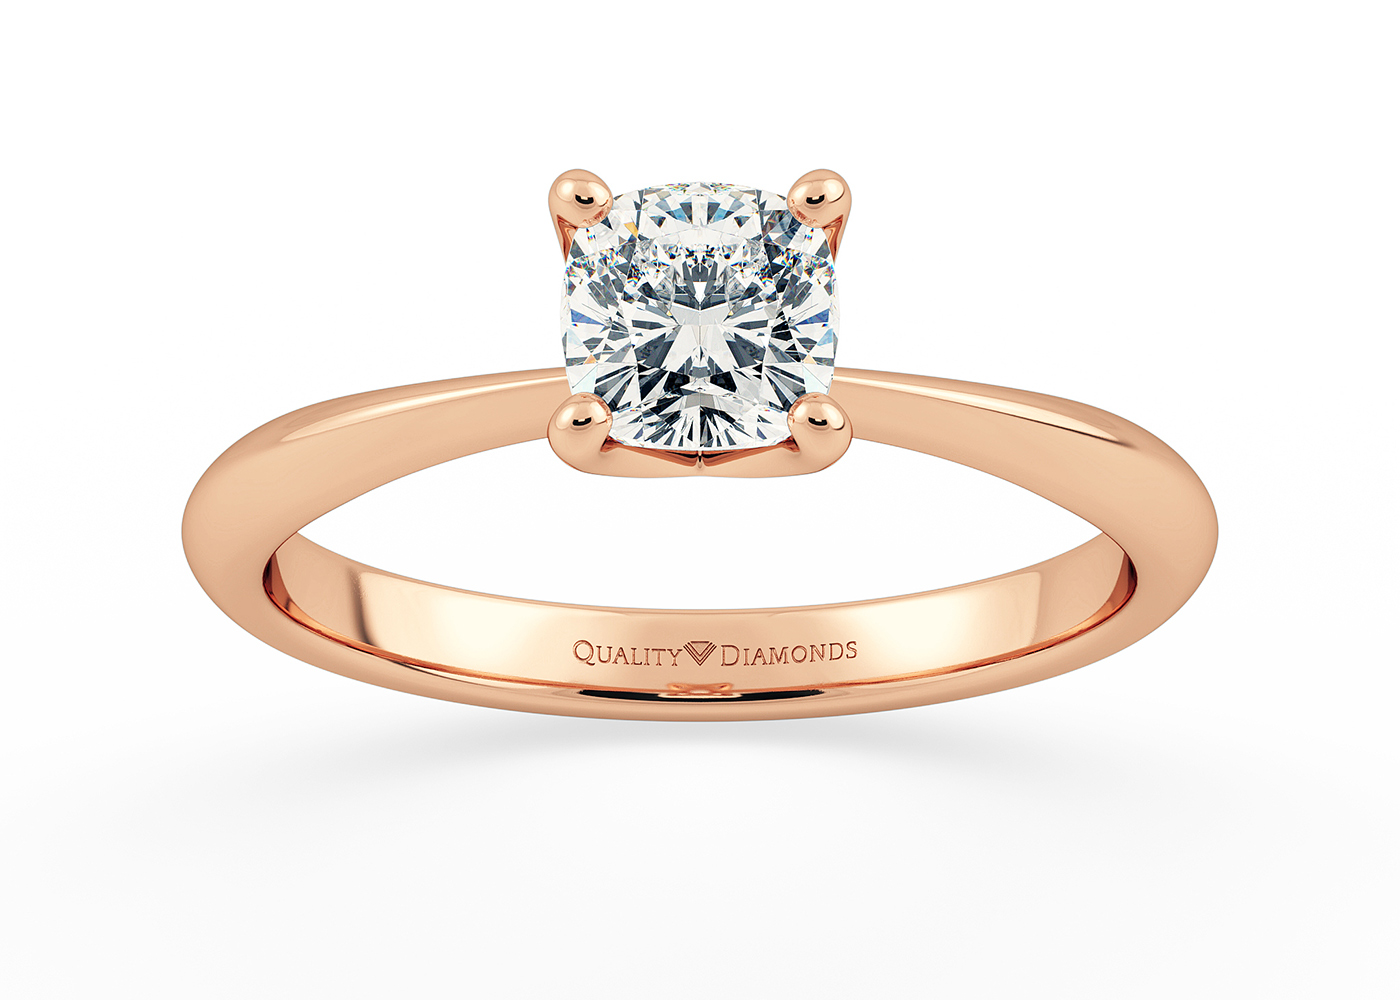 Half Carat Cushion Solitaire Diamond Engagement Ring in 18K Rose Gold